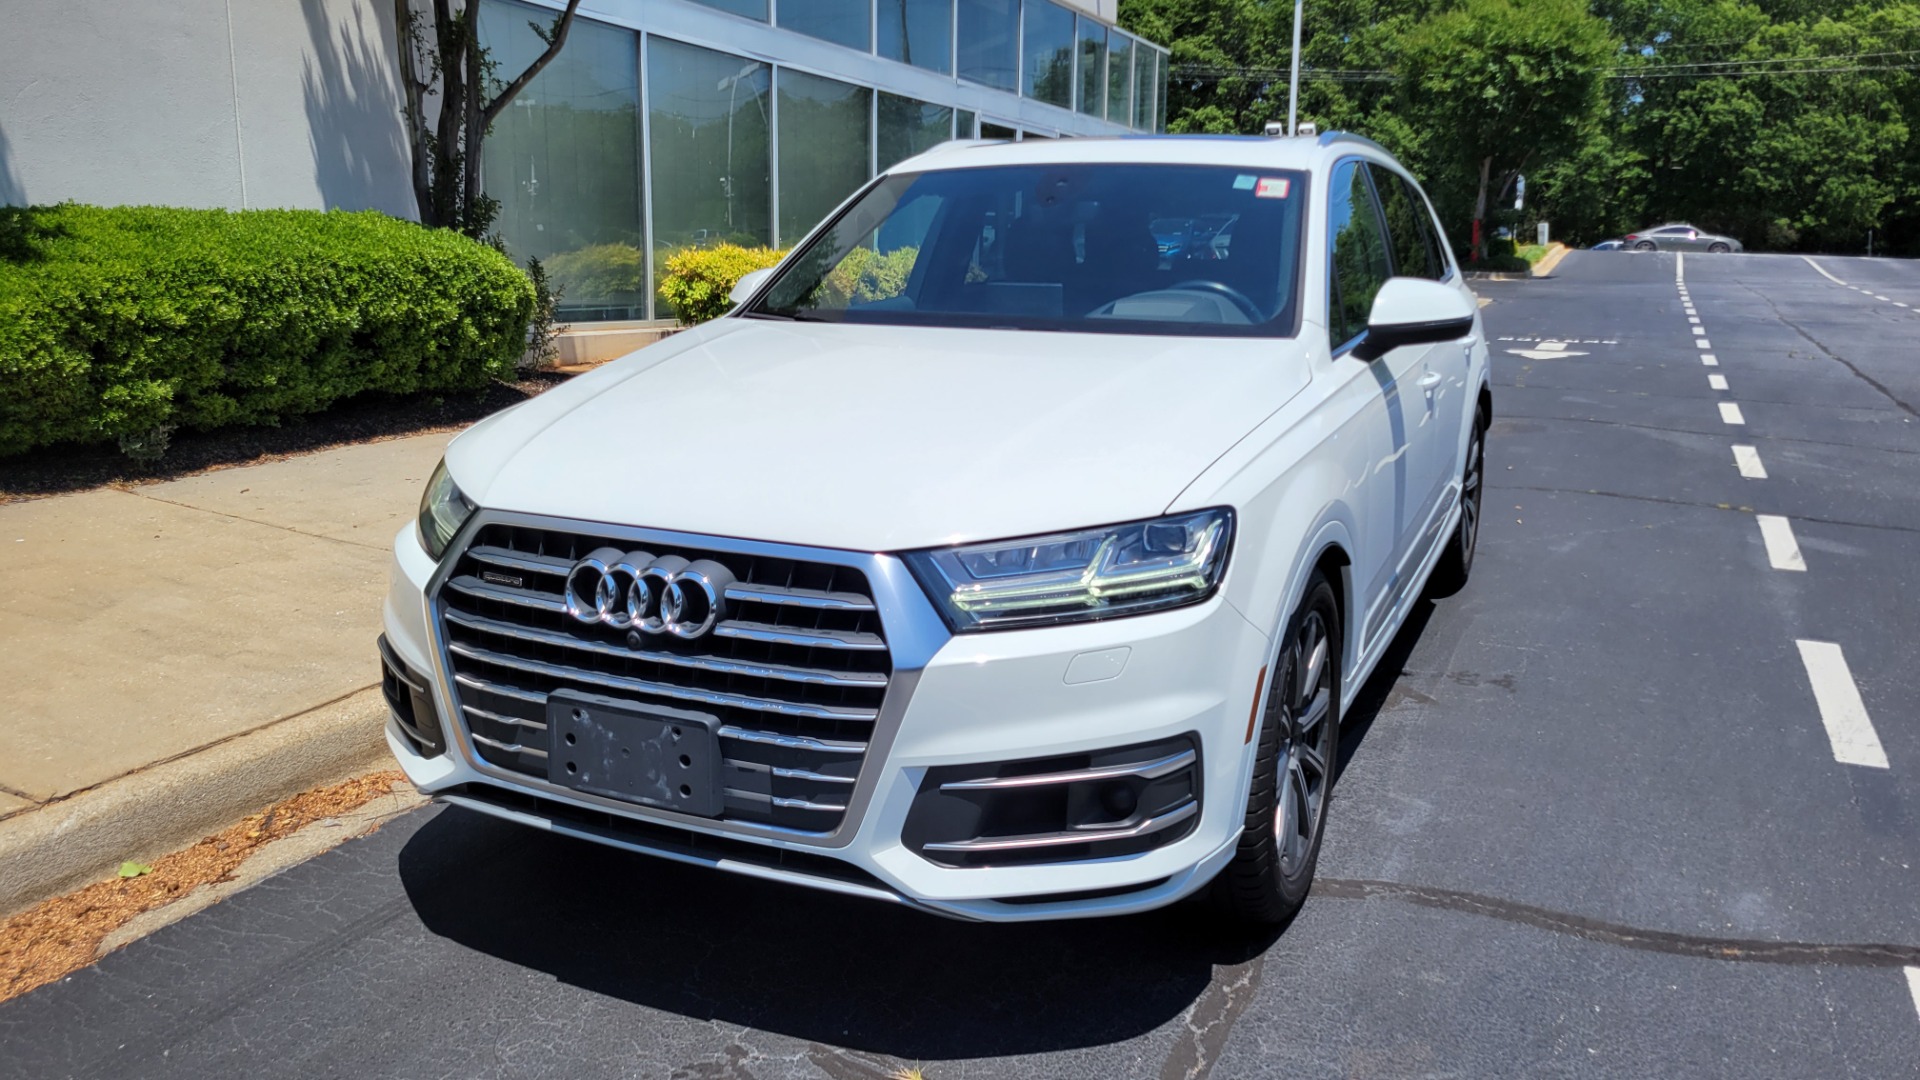 Used 2017 Audi Q7 PRESTIGE 3.0L SUV / NAV / DRVR ASST / CLD WTHR / SUNROOF / TOW / 3-ROW for sale $40,995 at Formula Imports in Charlotte NC 28227 2